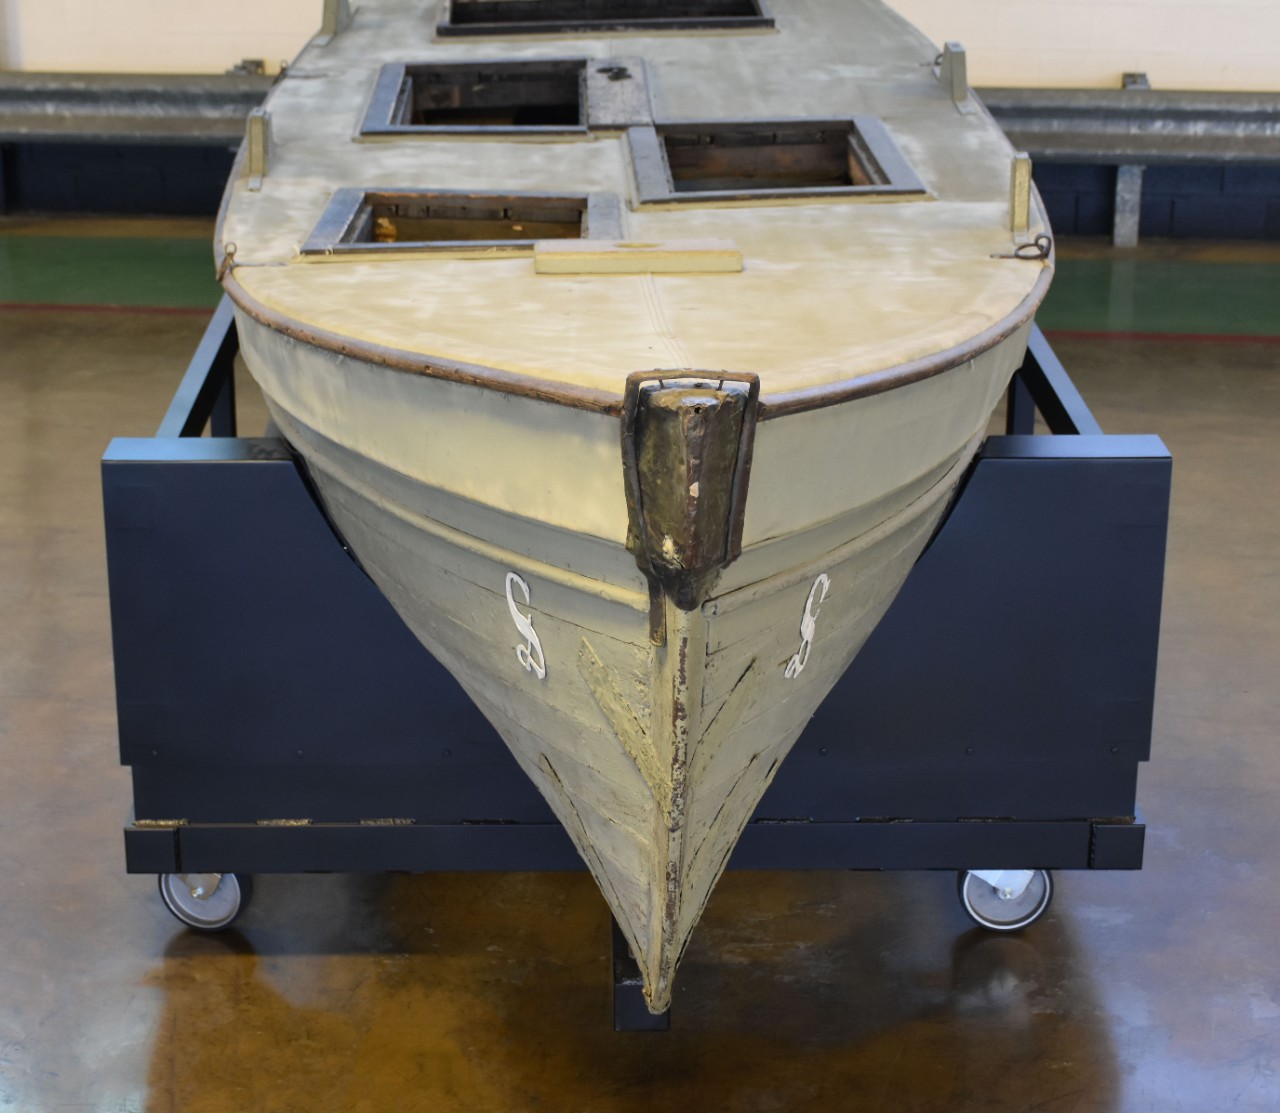 <p>Bow view of small boat. White S painted on both sides of bow beam.</p>
